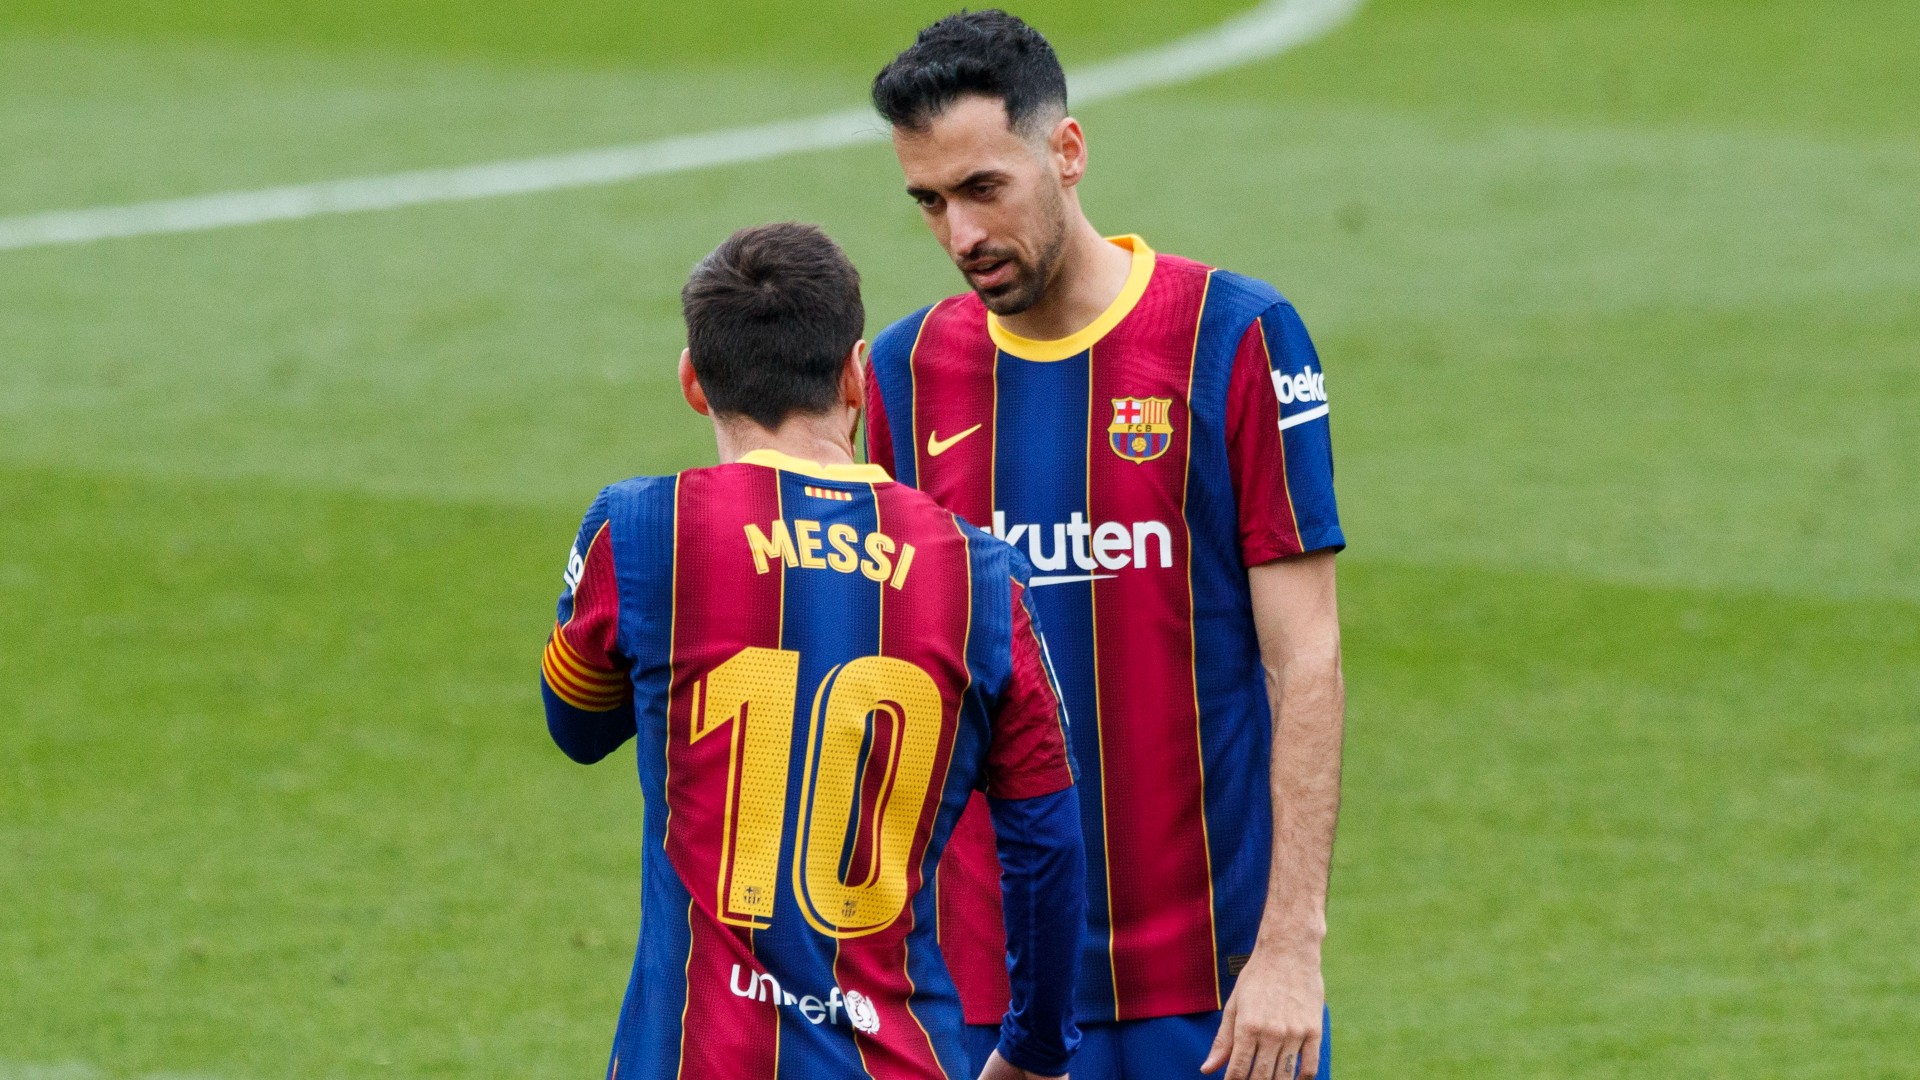 I miss him' – Busquets dreaming of Messi returning to Barcelona